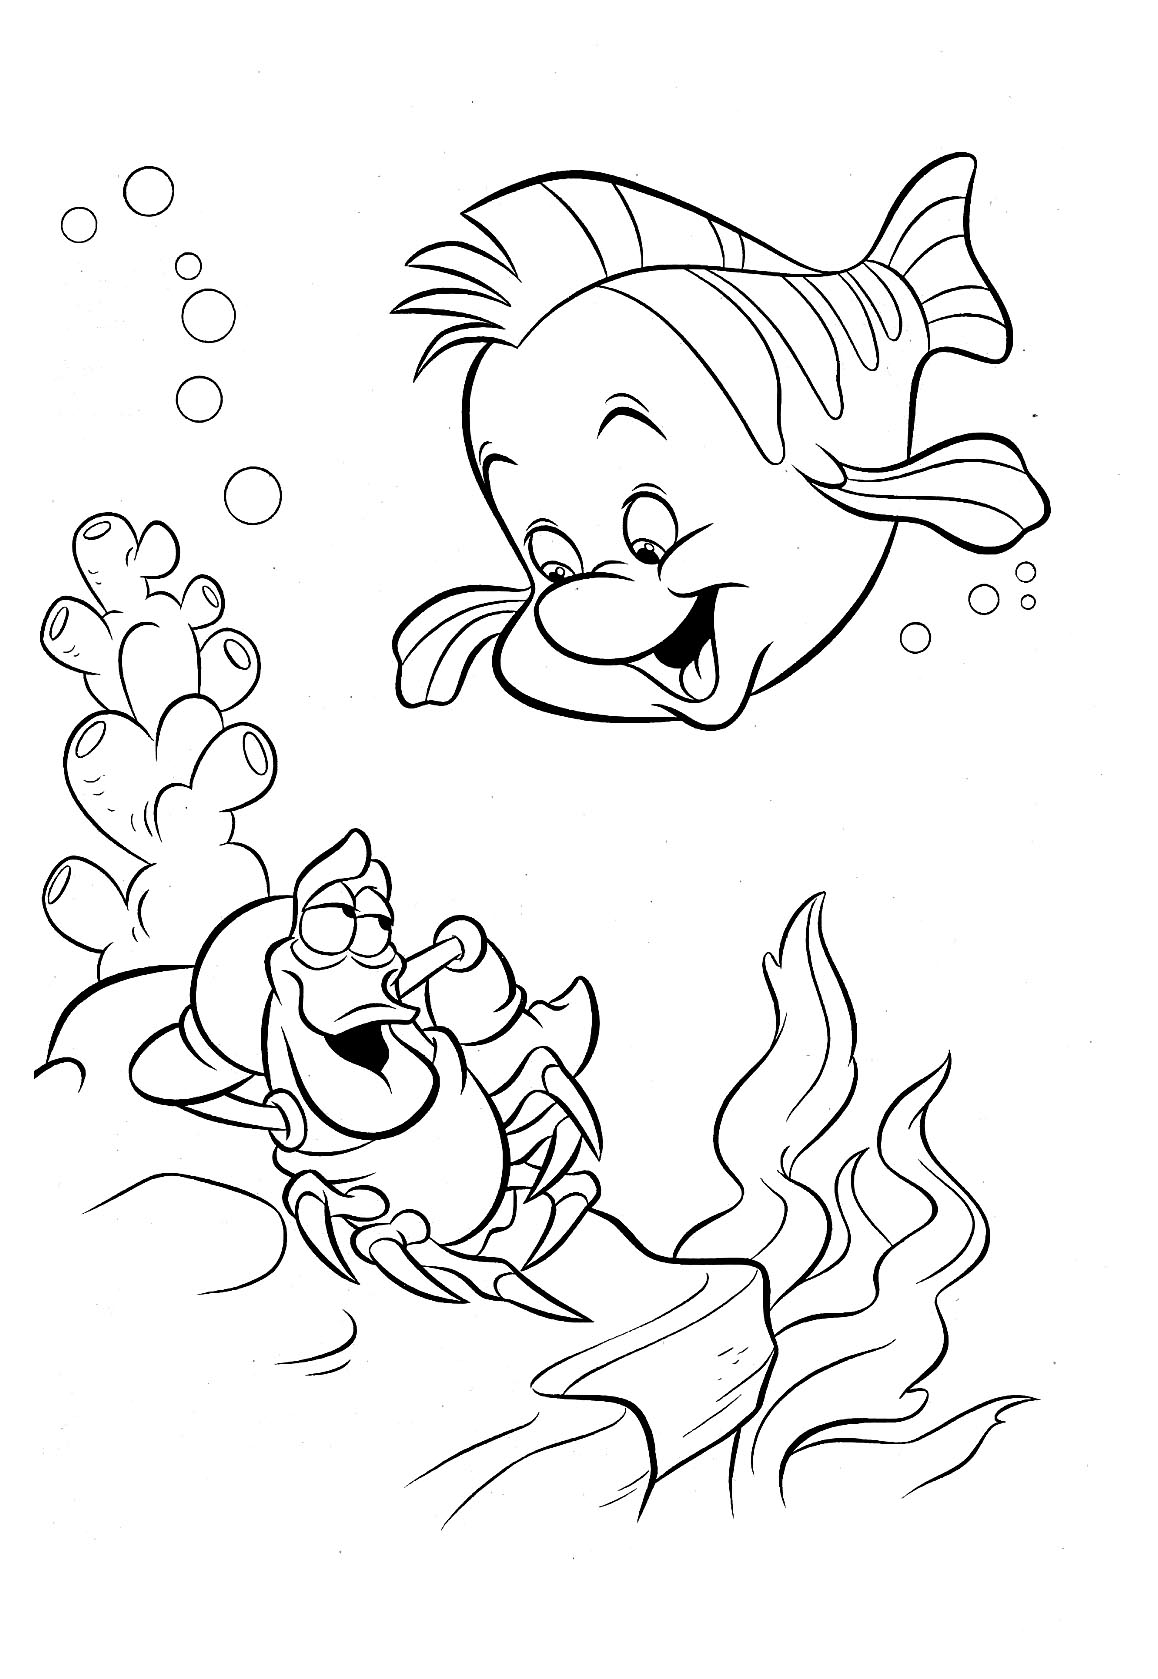 Coloring page The Little Mermaid #127279 (Animation Movies) – Printable